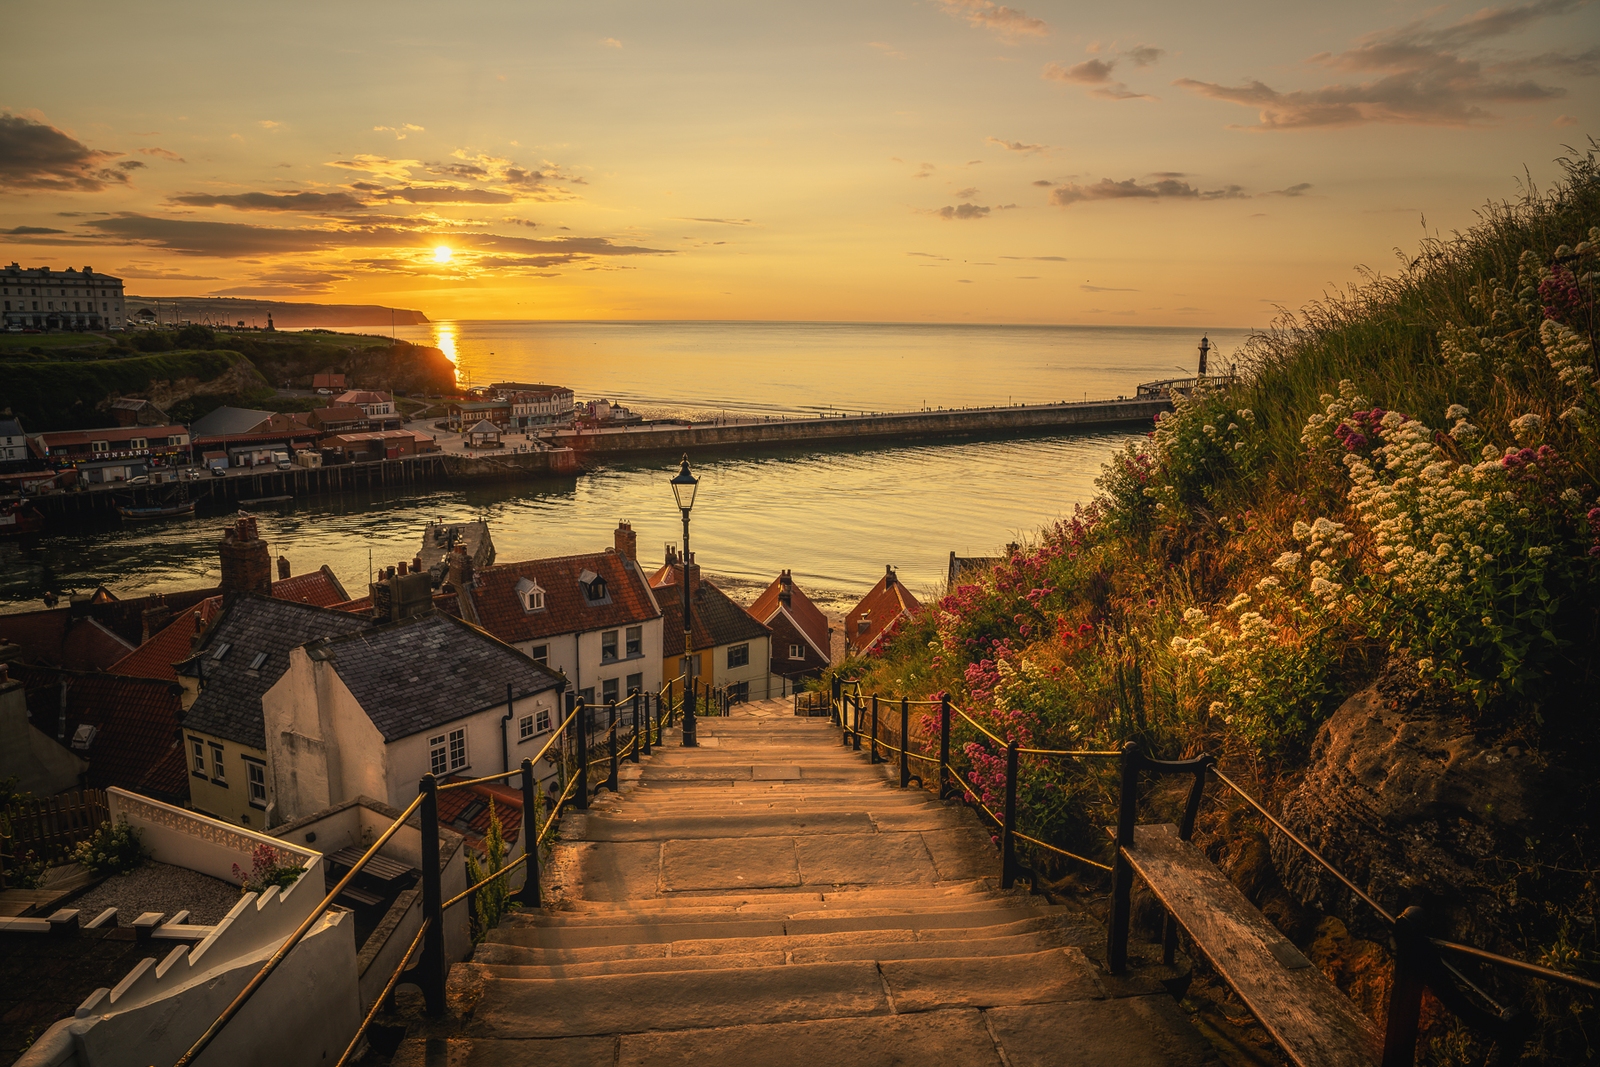 Image of Whitby 199 Steps by James Billings.